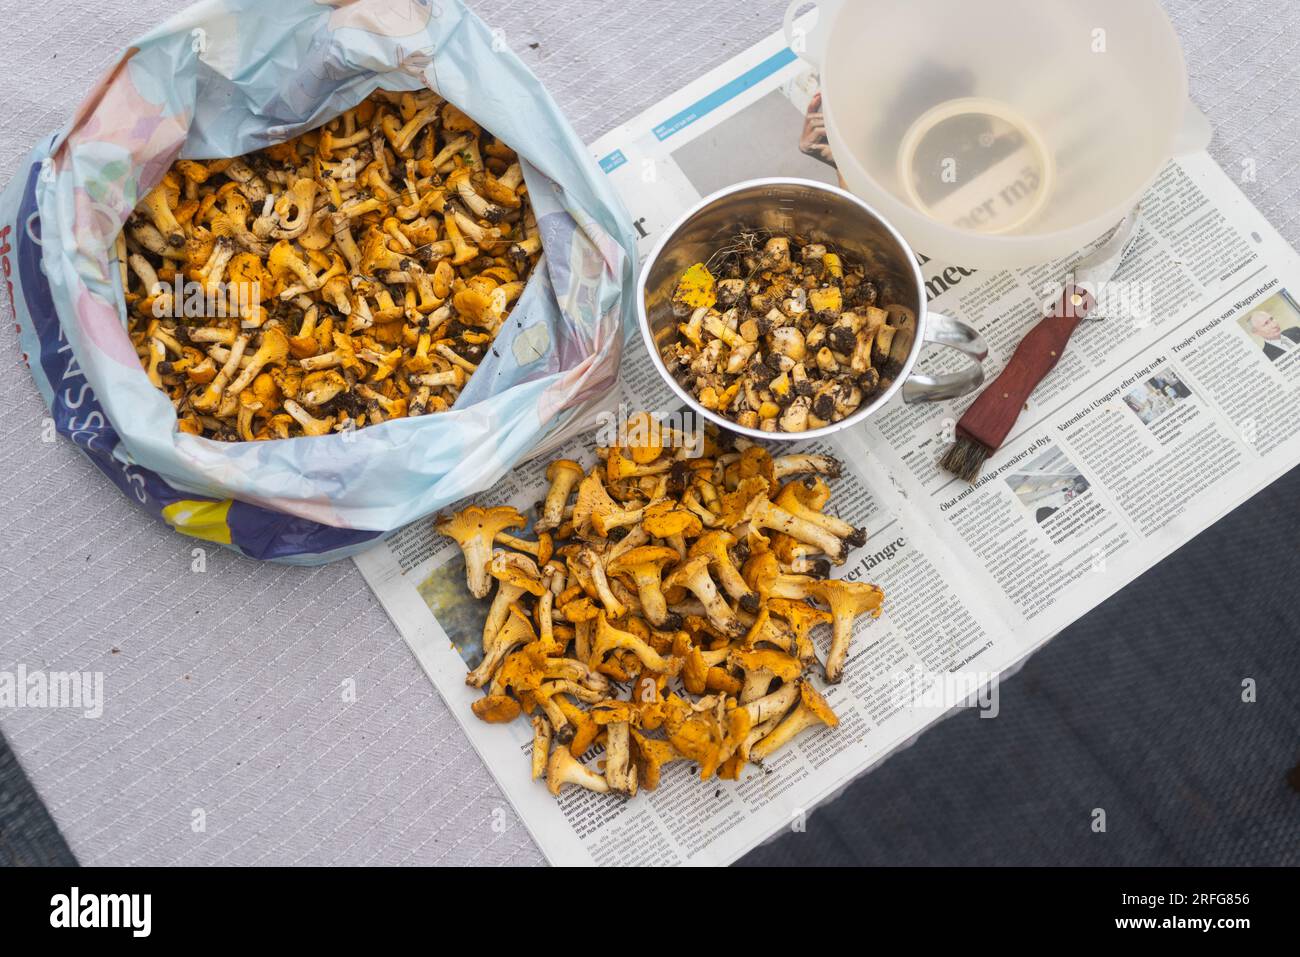 Freshly picked chanterelles (Cantharellus cibarius) to be cleaned. Cantharellus cibarius is a species of golden chanterelle mushroom in the genus Cantharellus. Stock Photo